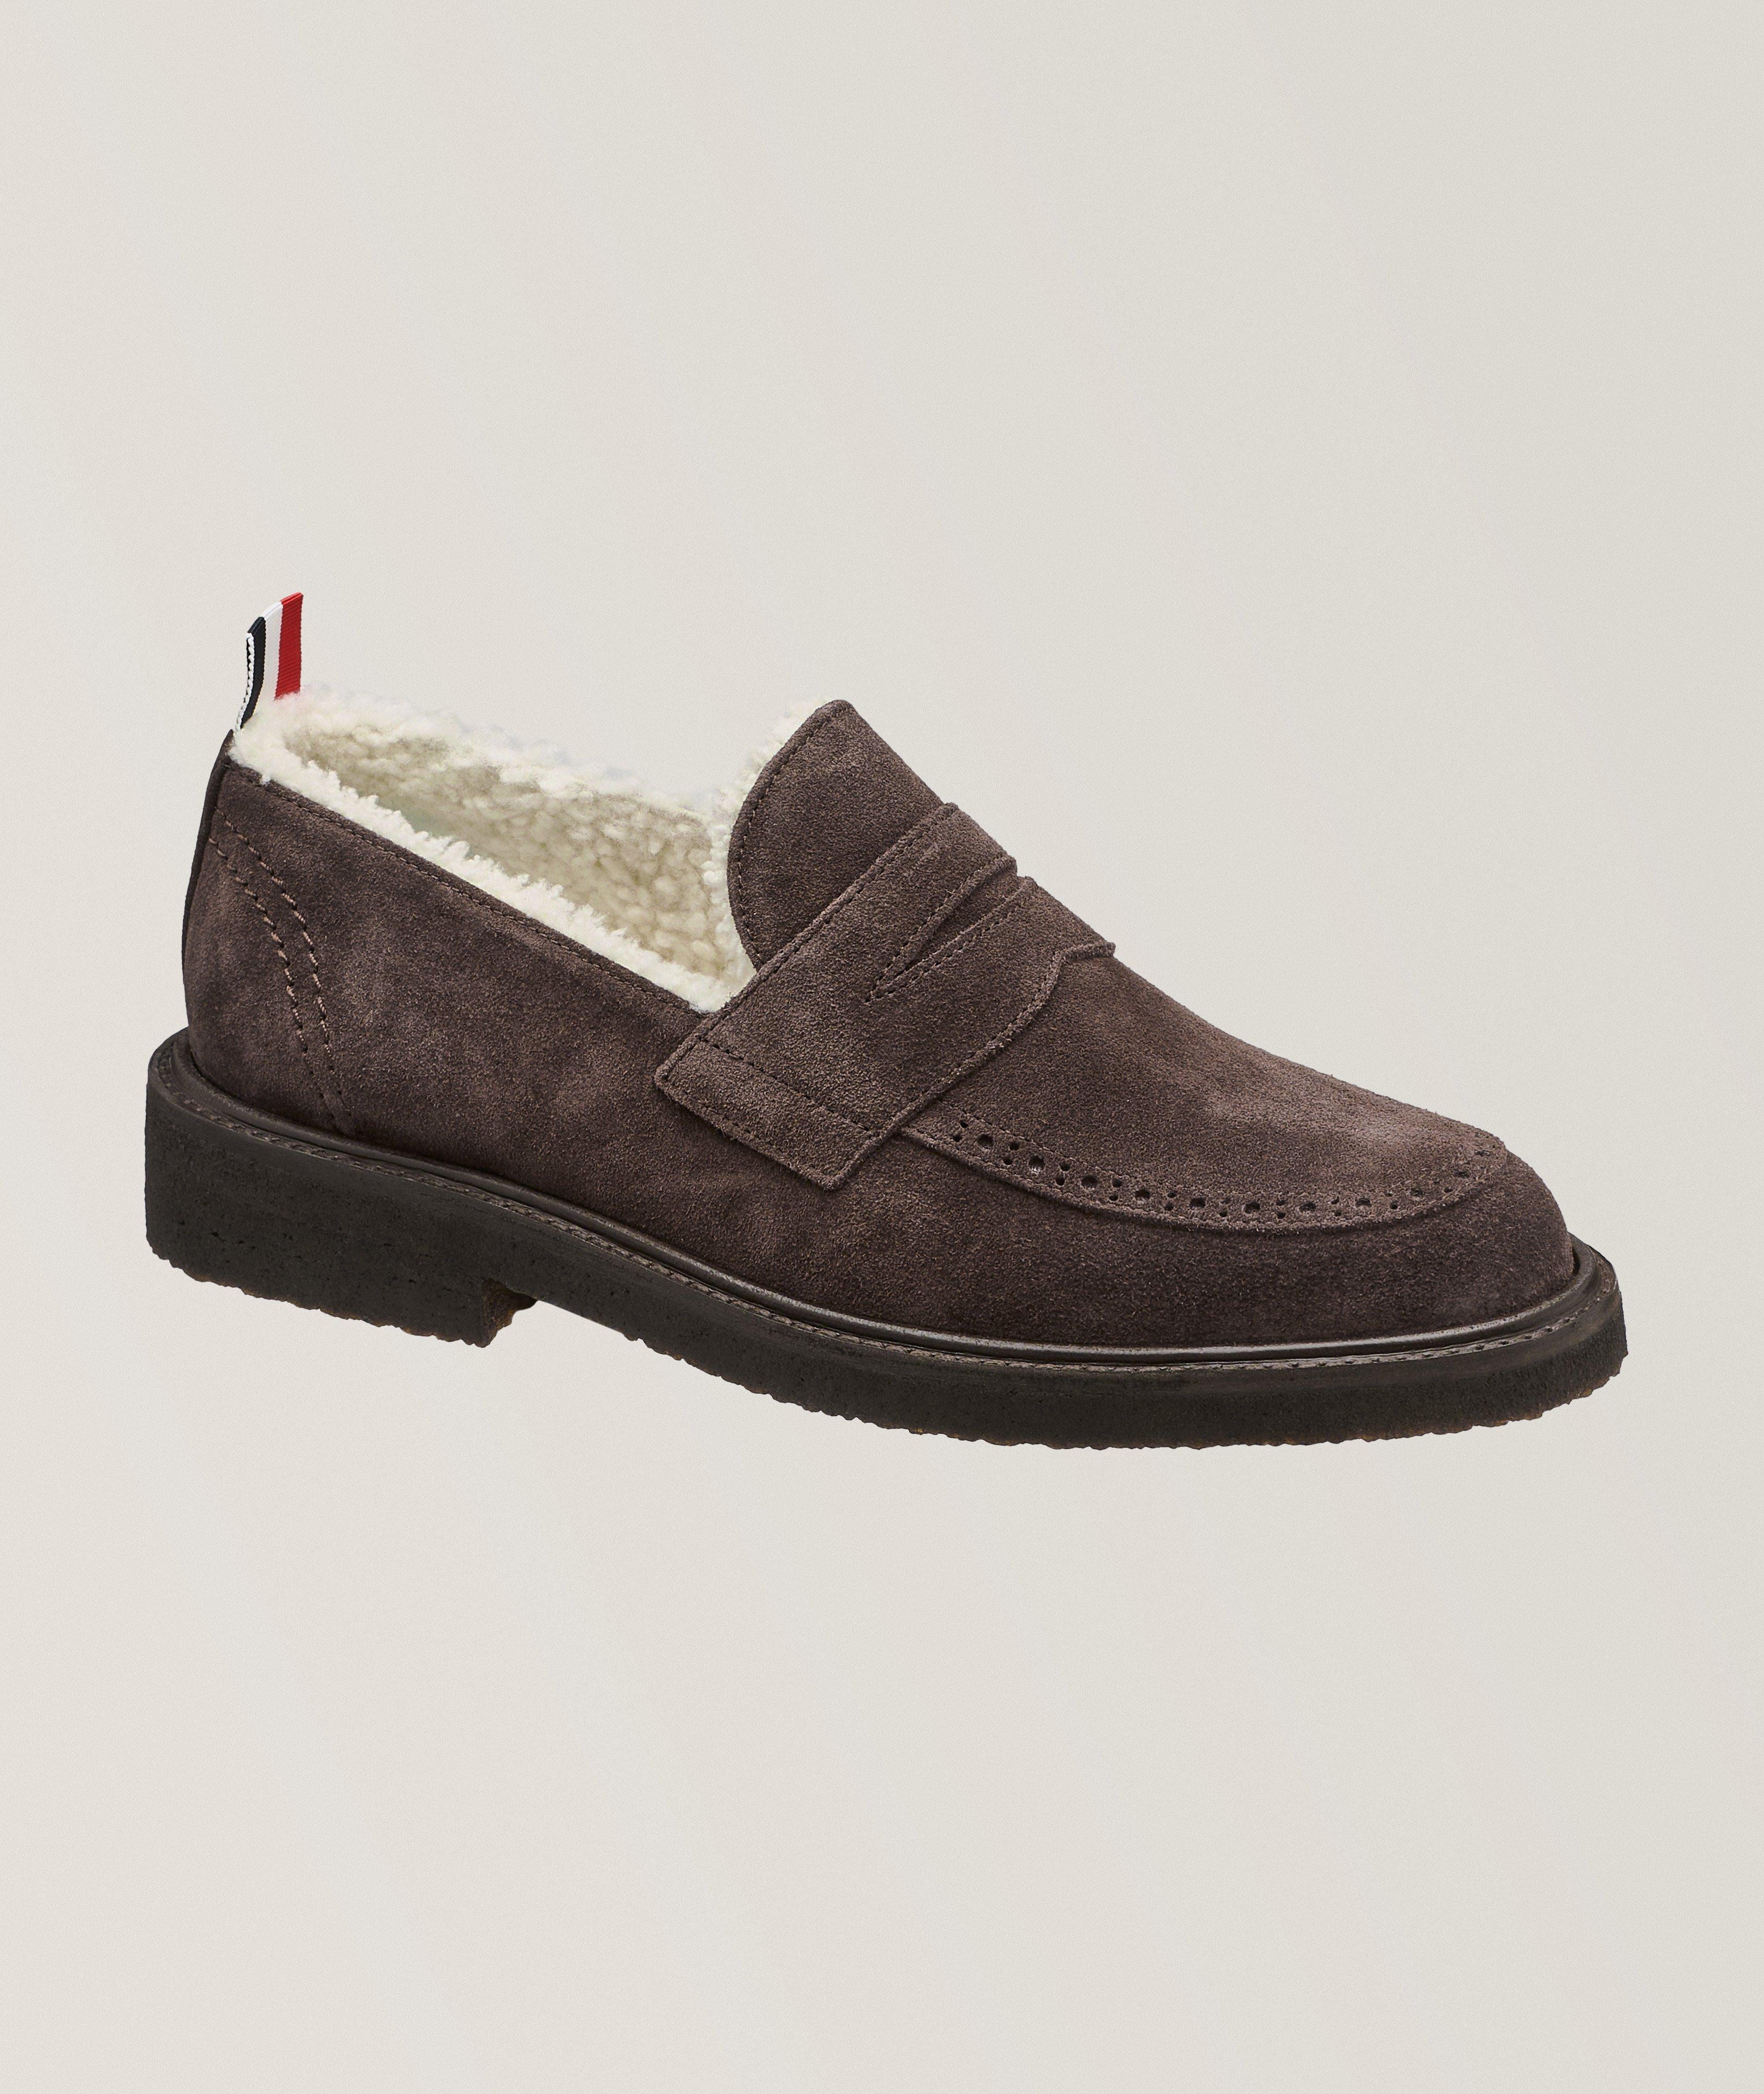 Shearling Lined Suede Penny Loafers  image 0